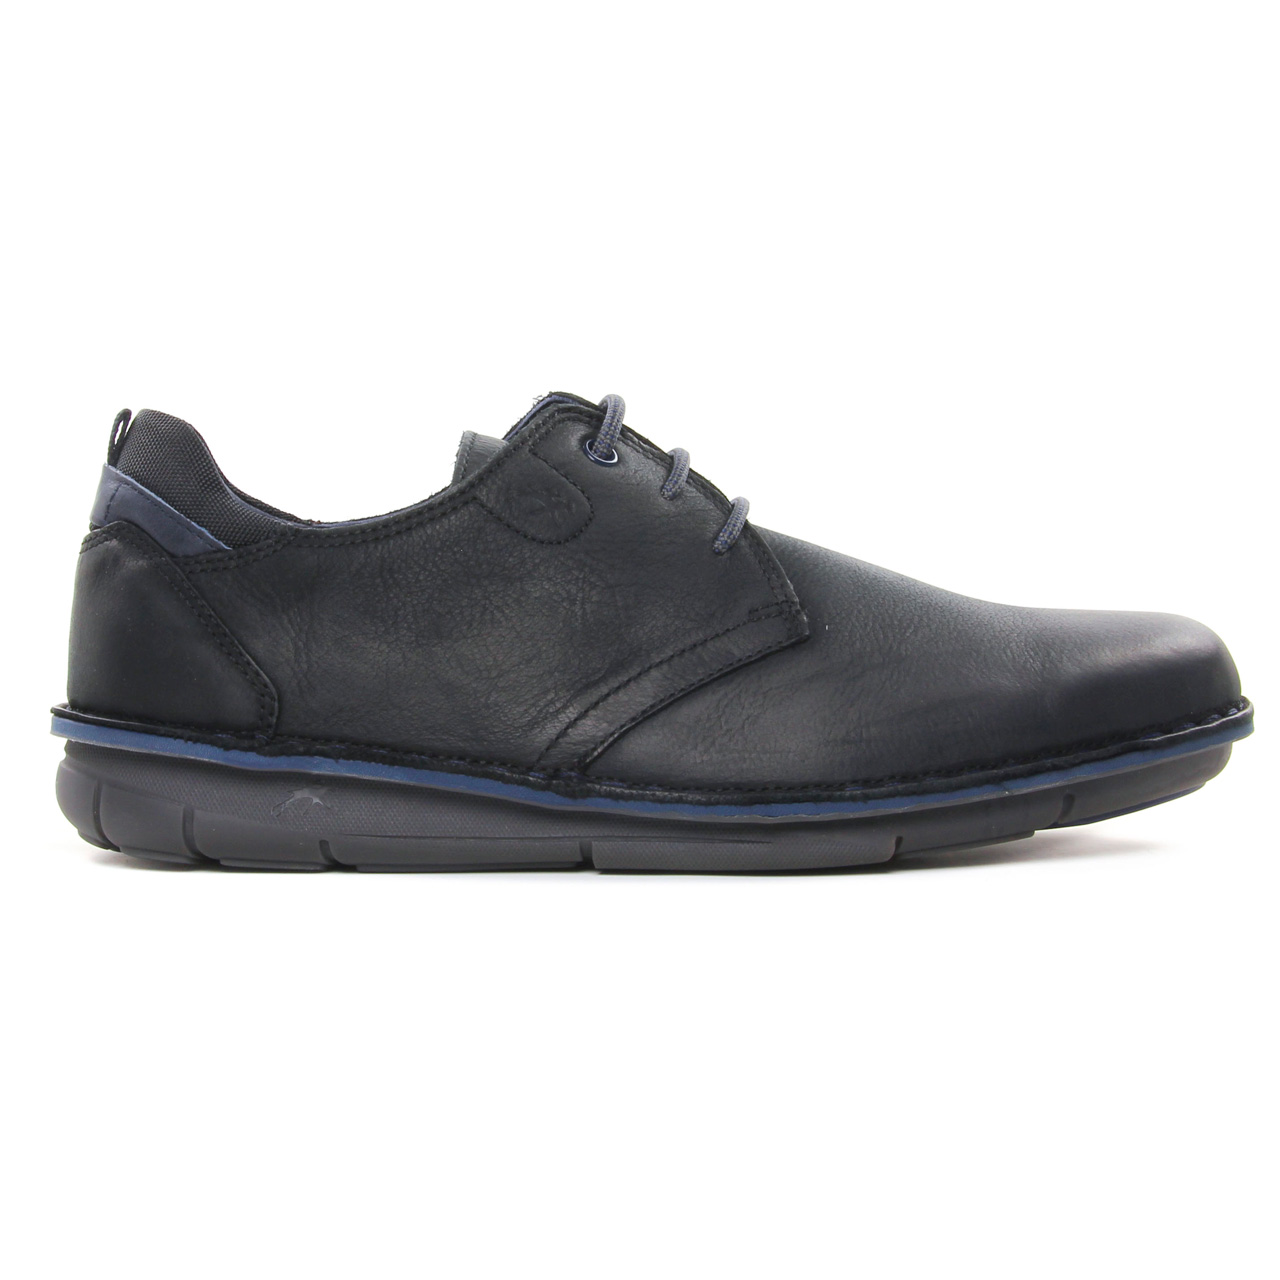 Chaussures Homme Chaussures Chaussures basses Chaussures basses 